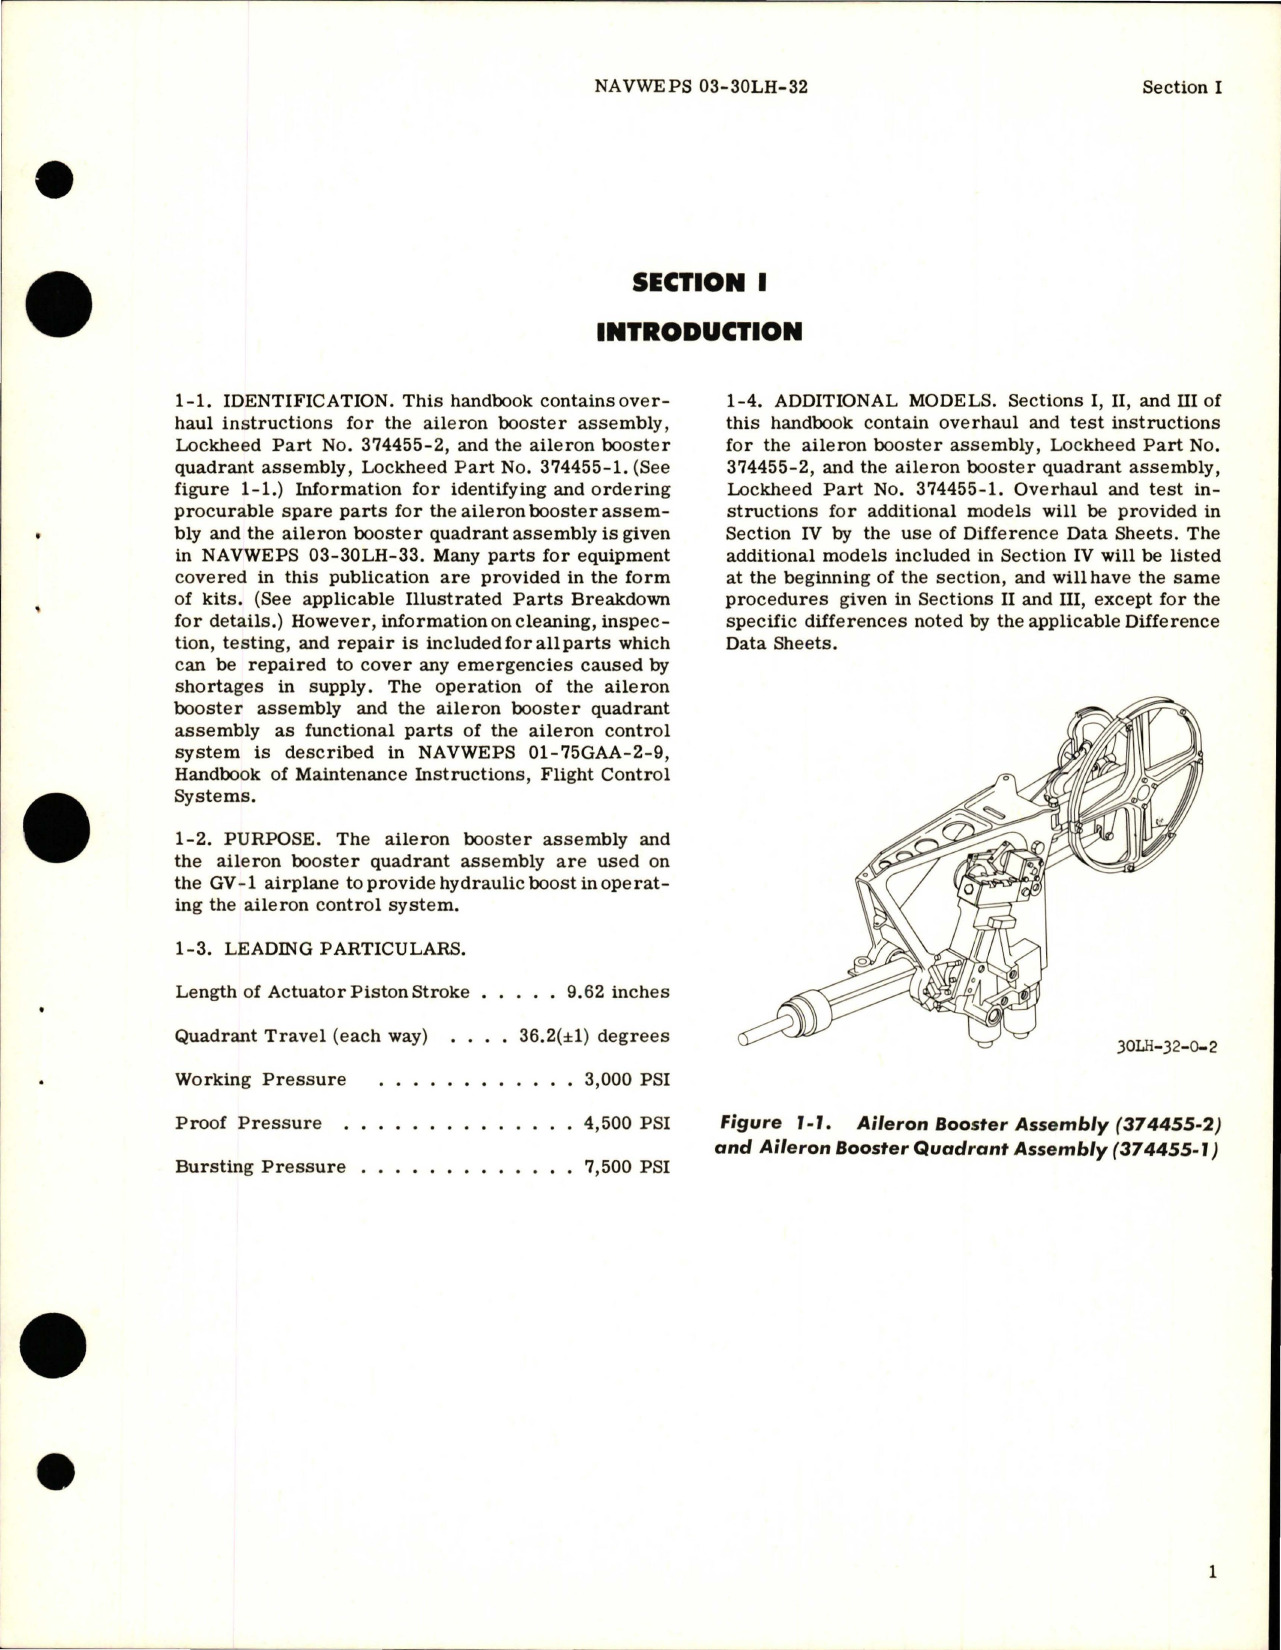 Sample page 5 from AirCorps Library document: Overhaul Instructions for Aileron Booster Assy and Aileron Booster Quadrant Assembly - Parts 374455-1 and 374455-2